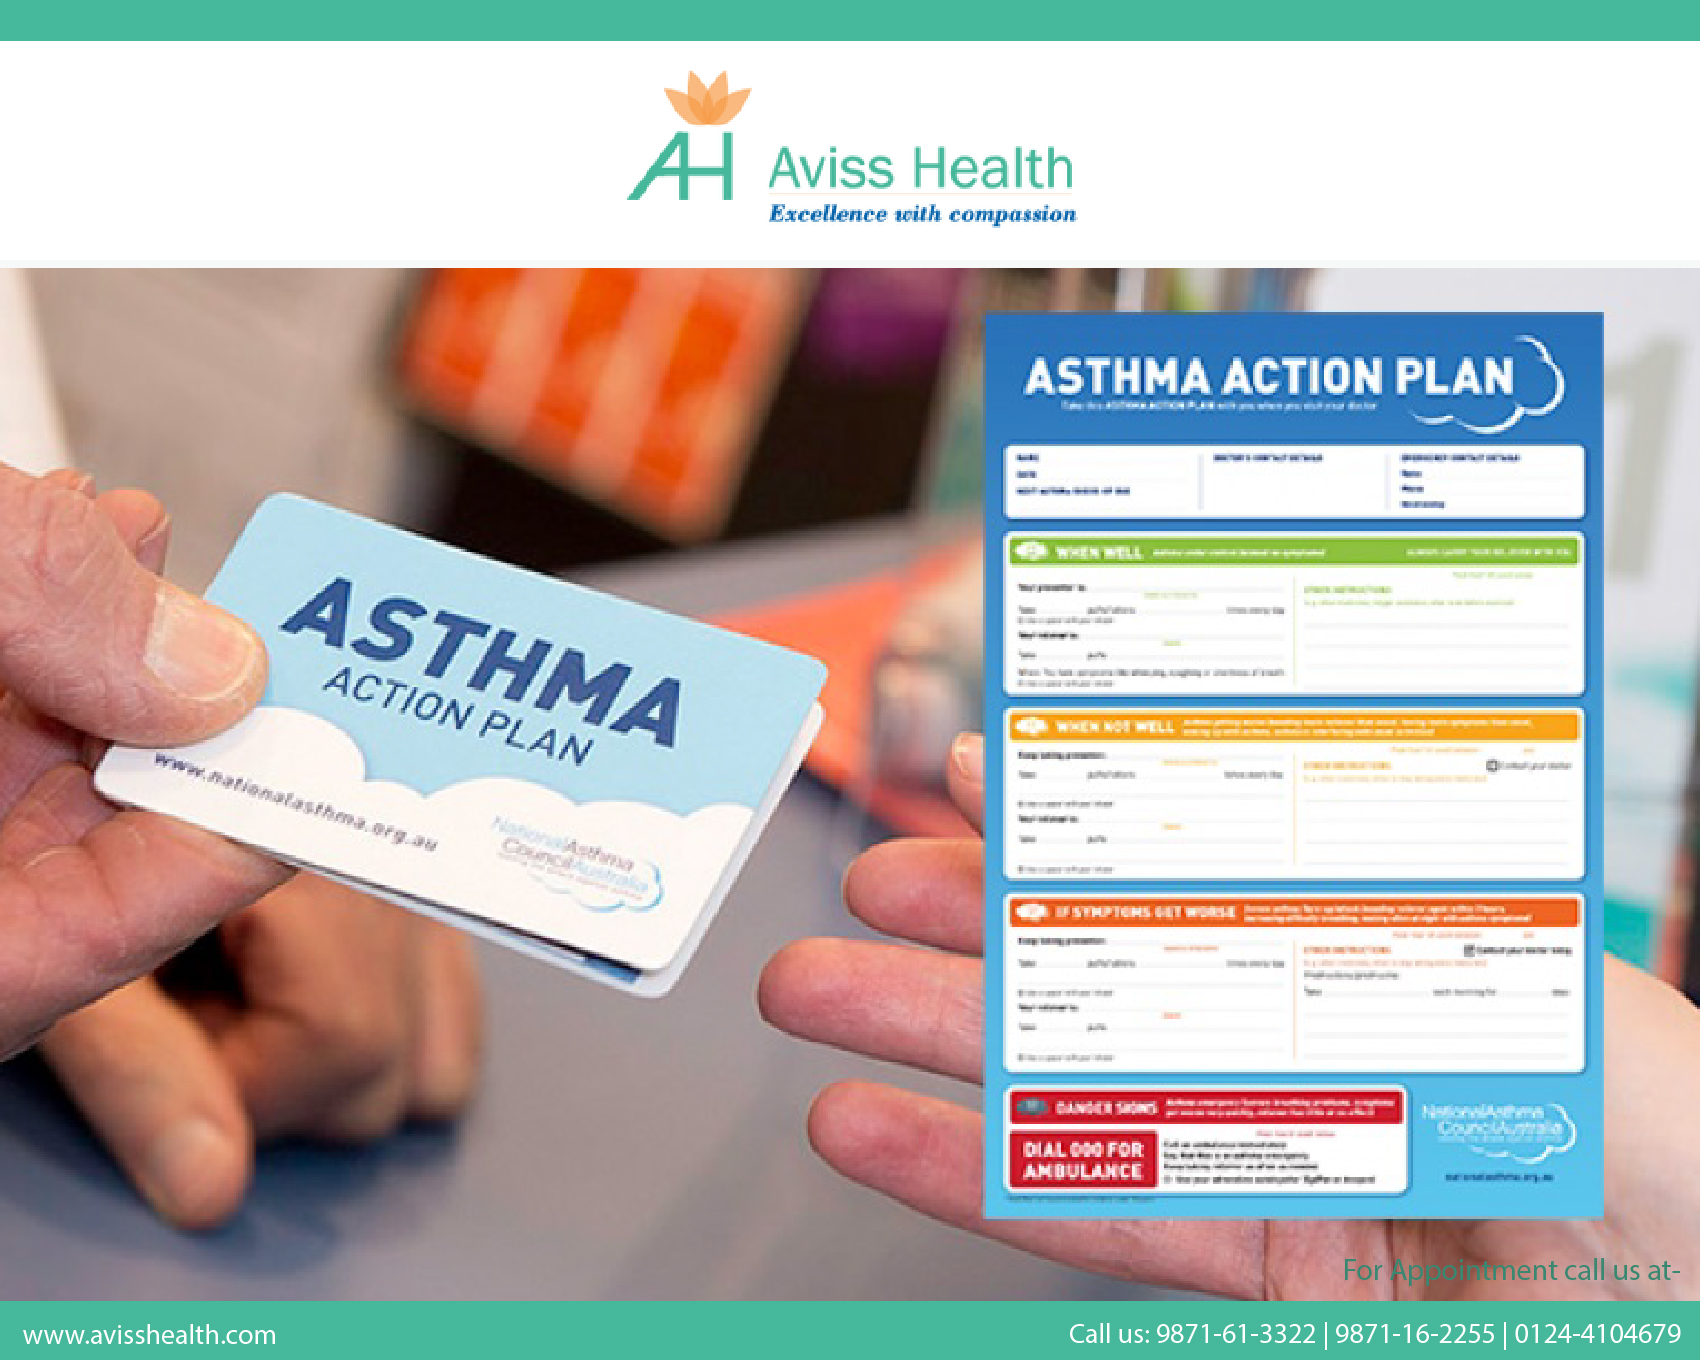 Why should asthma patients maintain a written action plan?